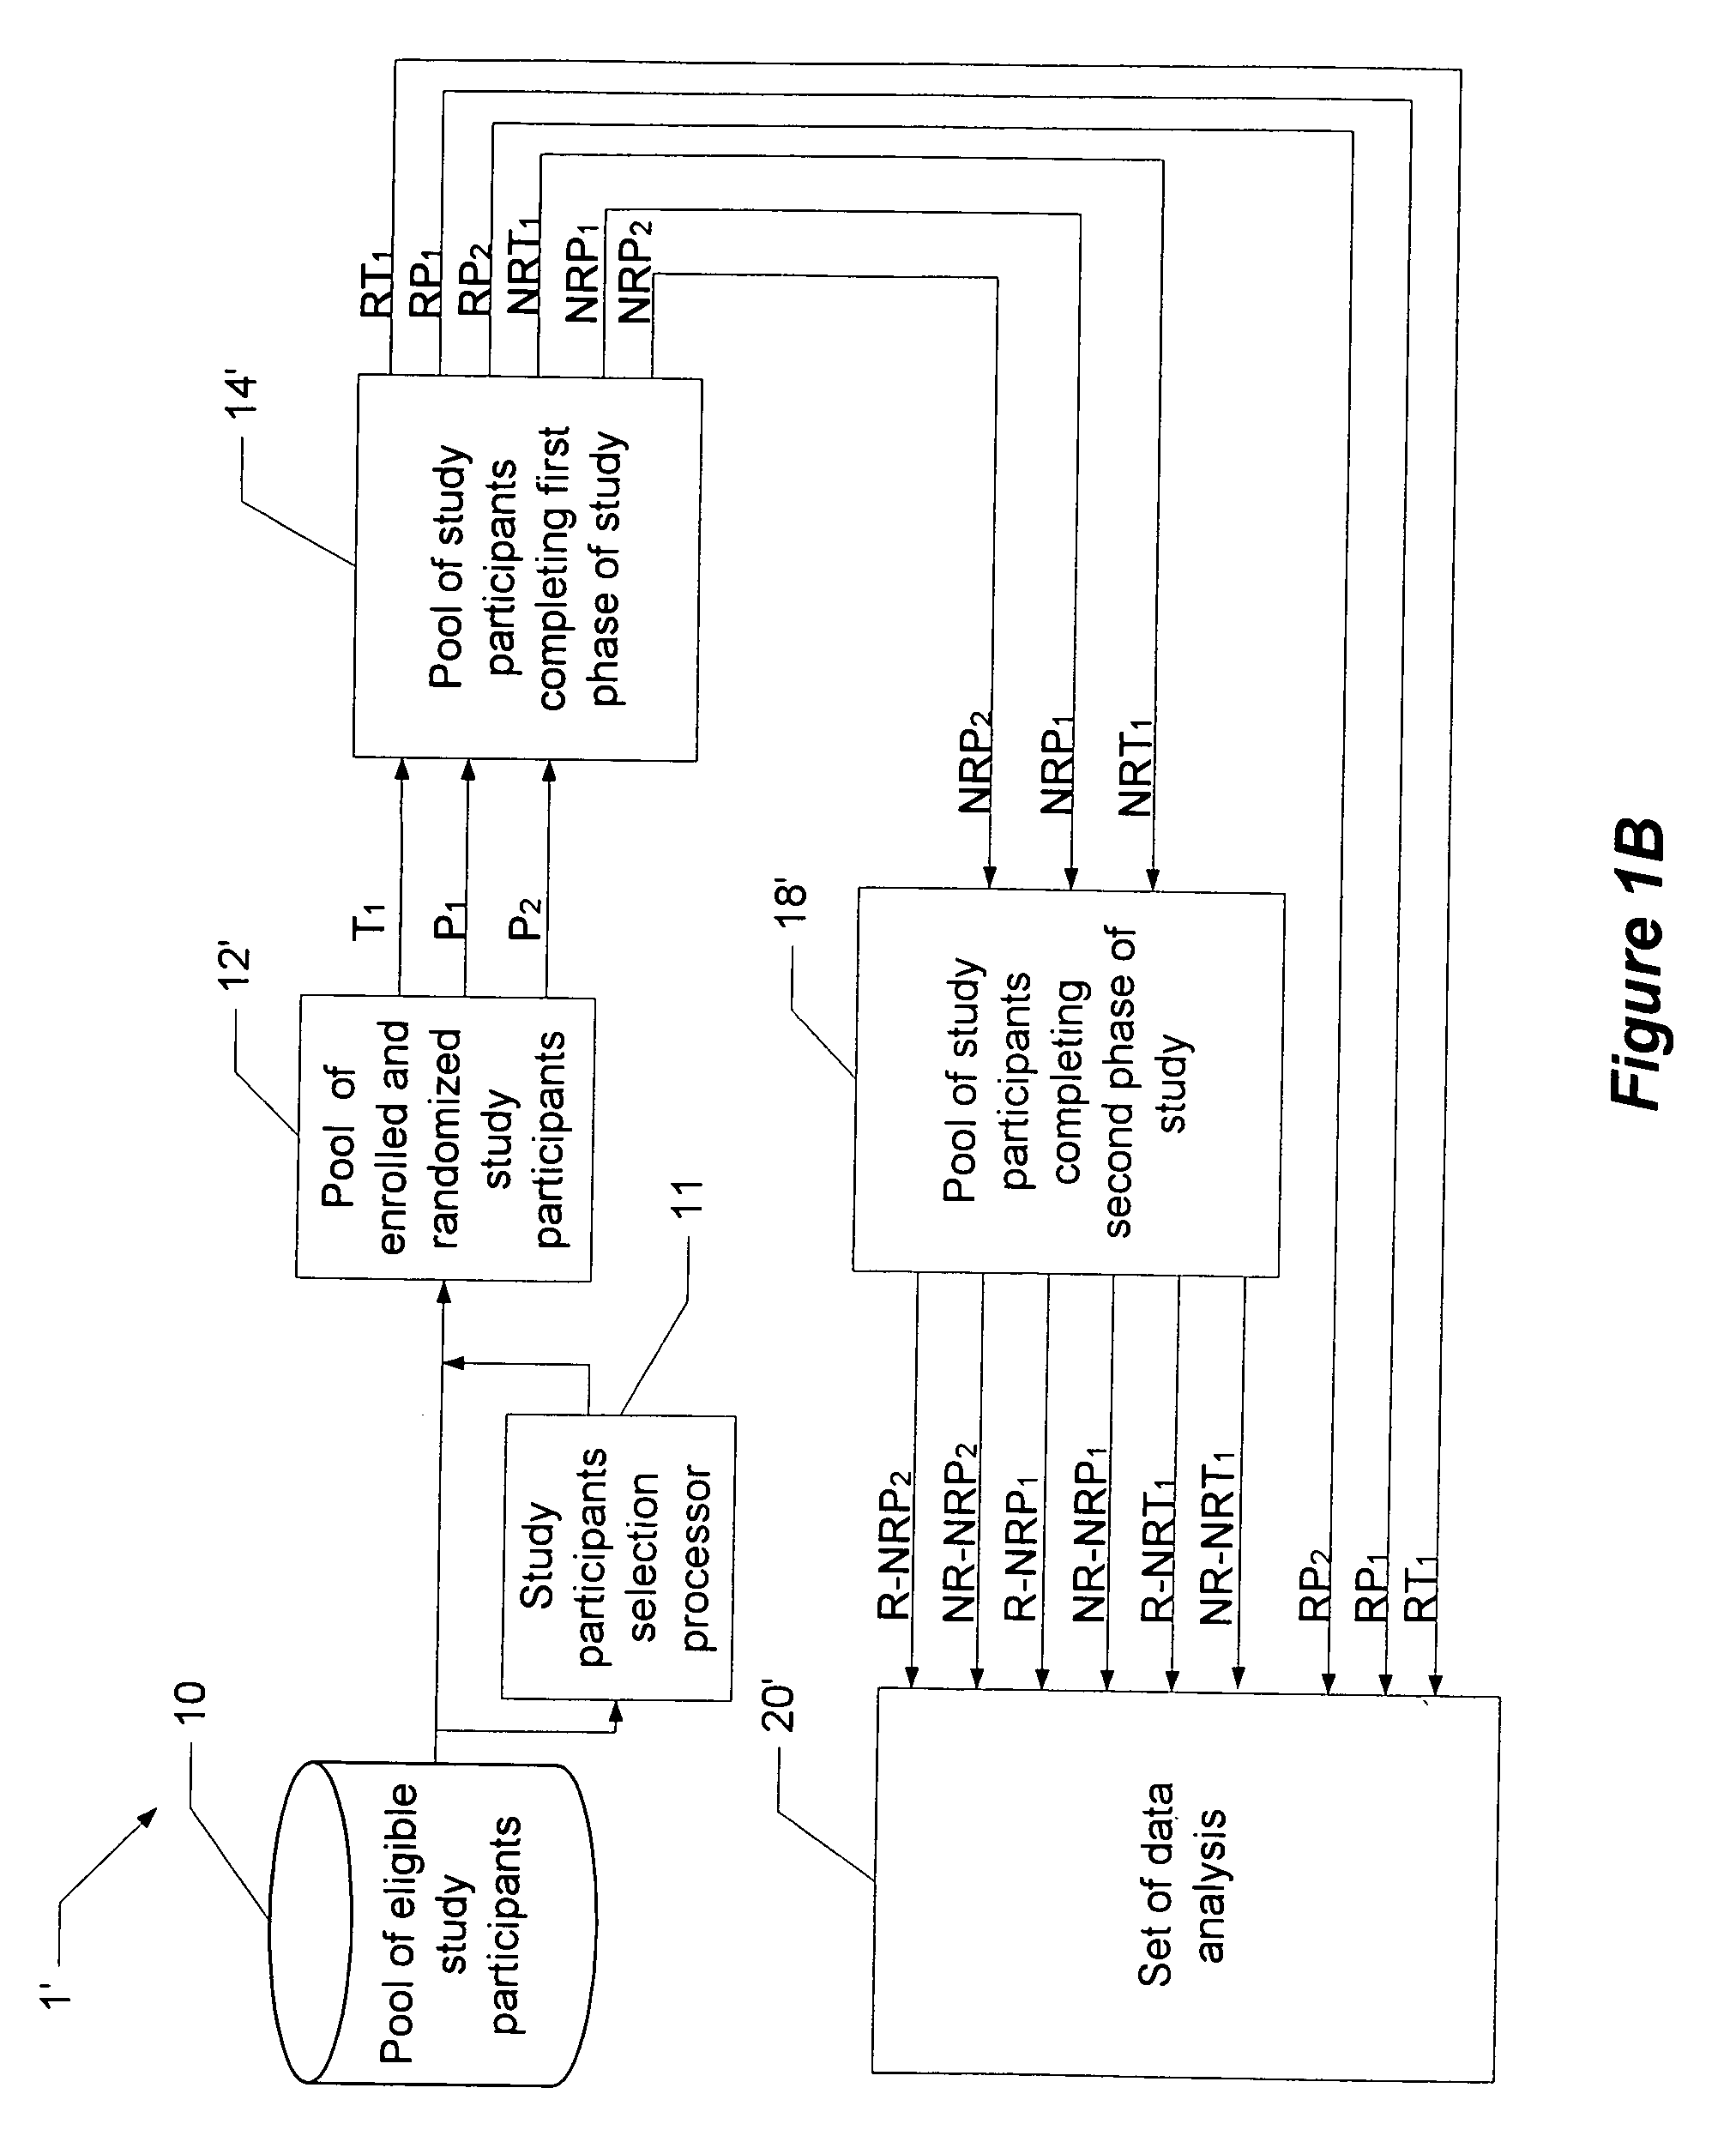 System and method for reducing the placebo effect in controlled clinical trials